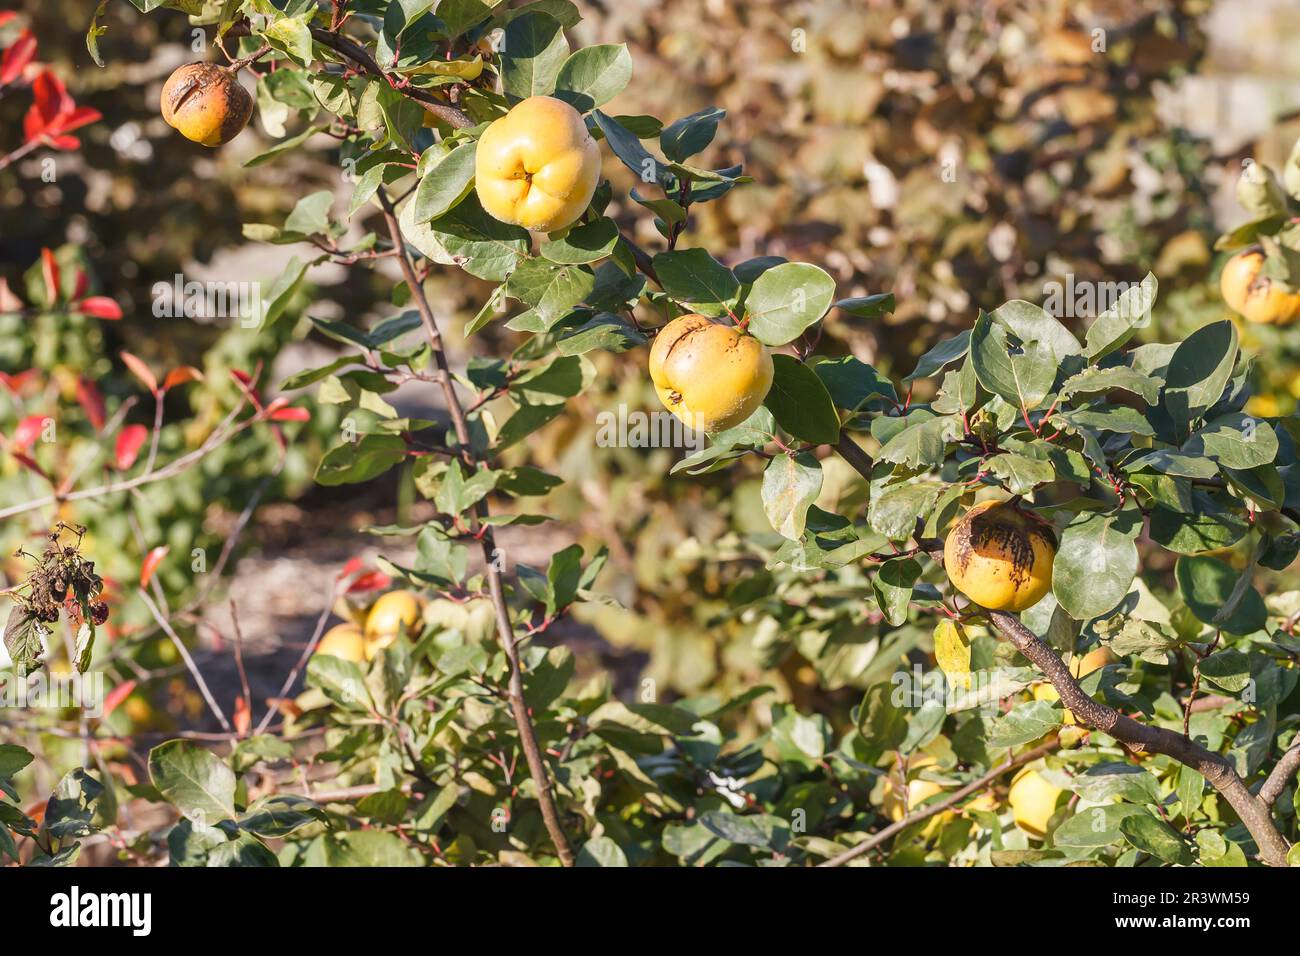 Cydonia oblonga, commonly known as Quince (fruits) Stock Photo